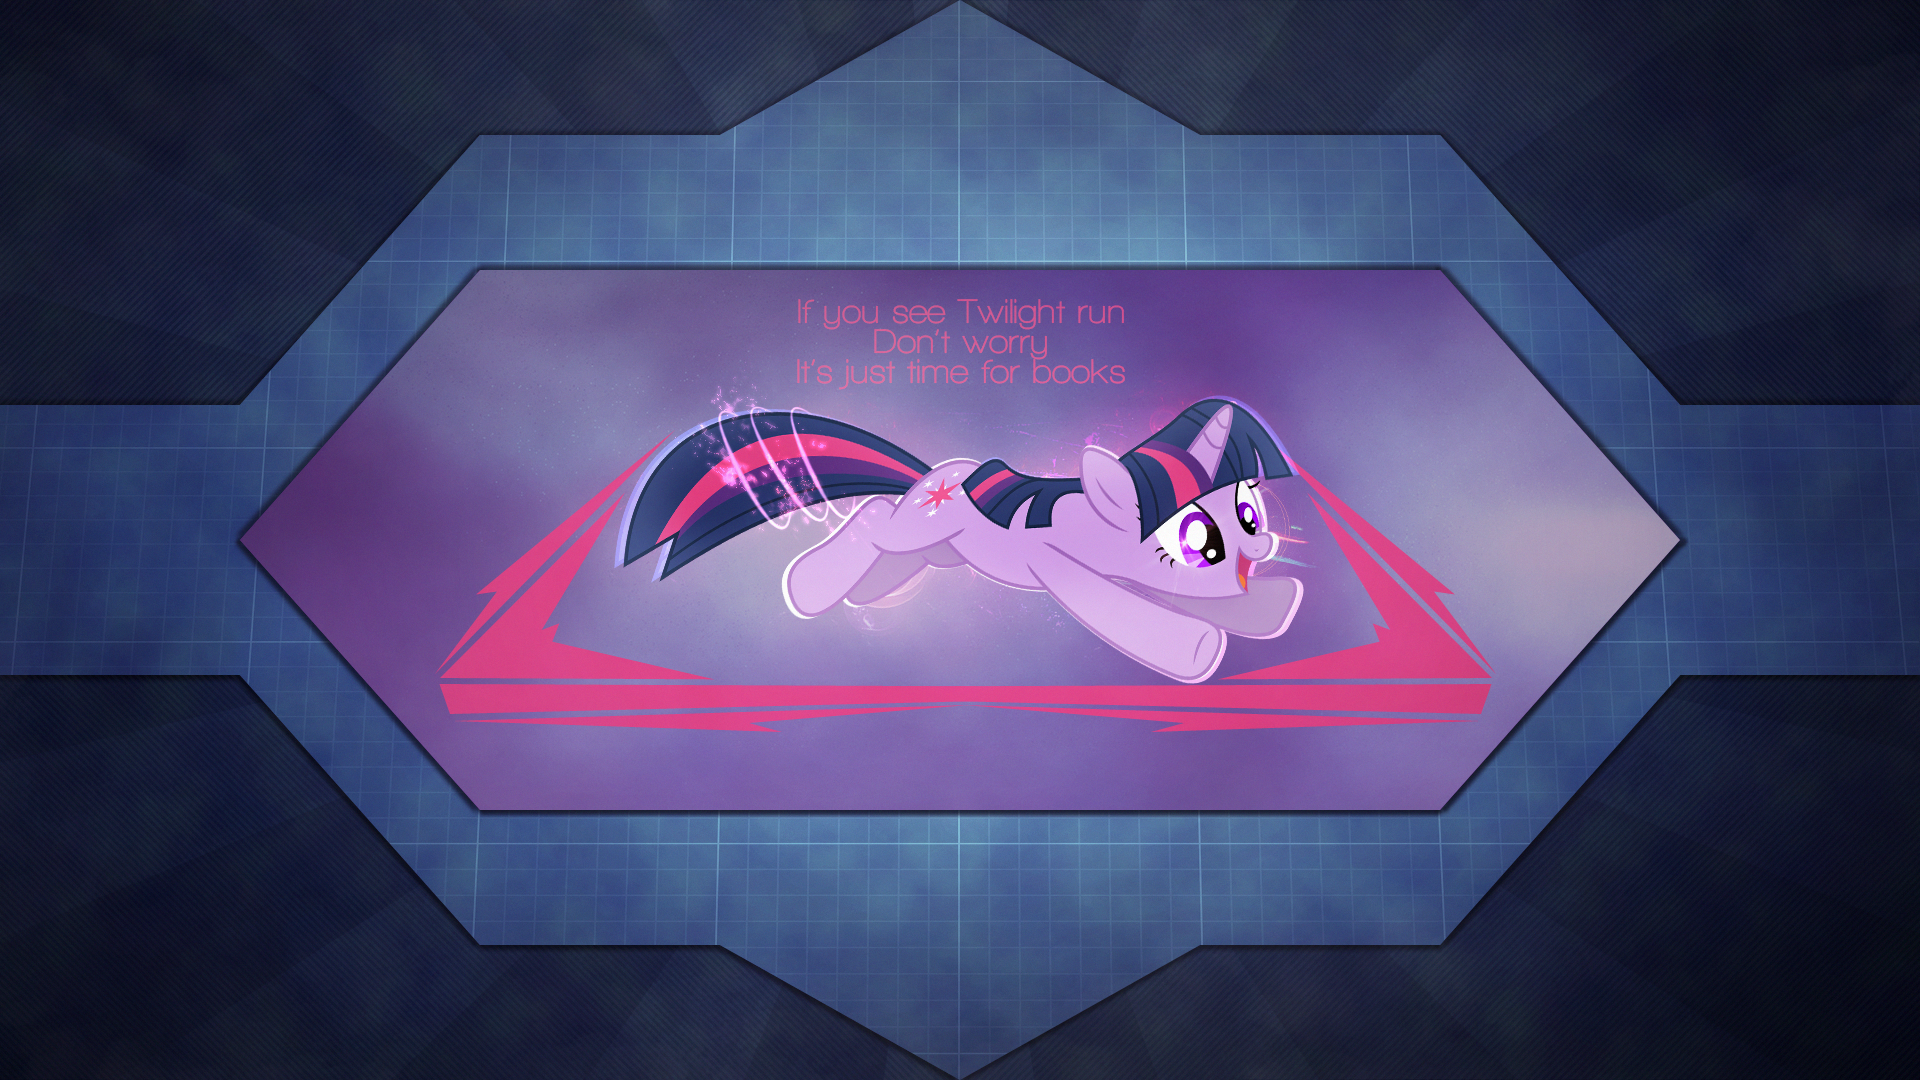 Wallpaper ~ Twilight Sparkle Minimalism. by HornFlakes and Mackaged